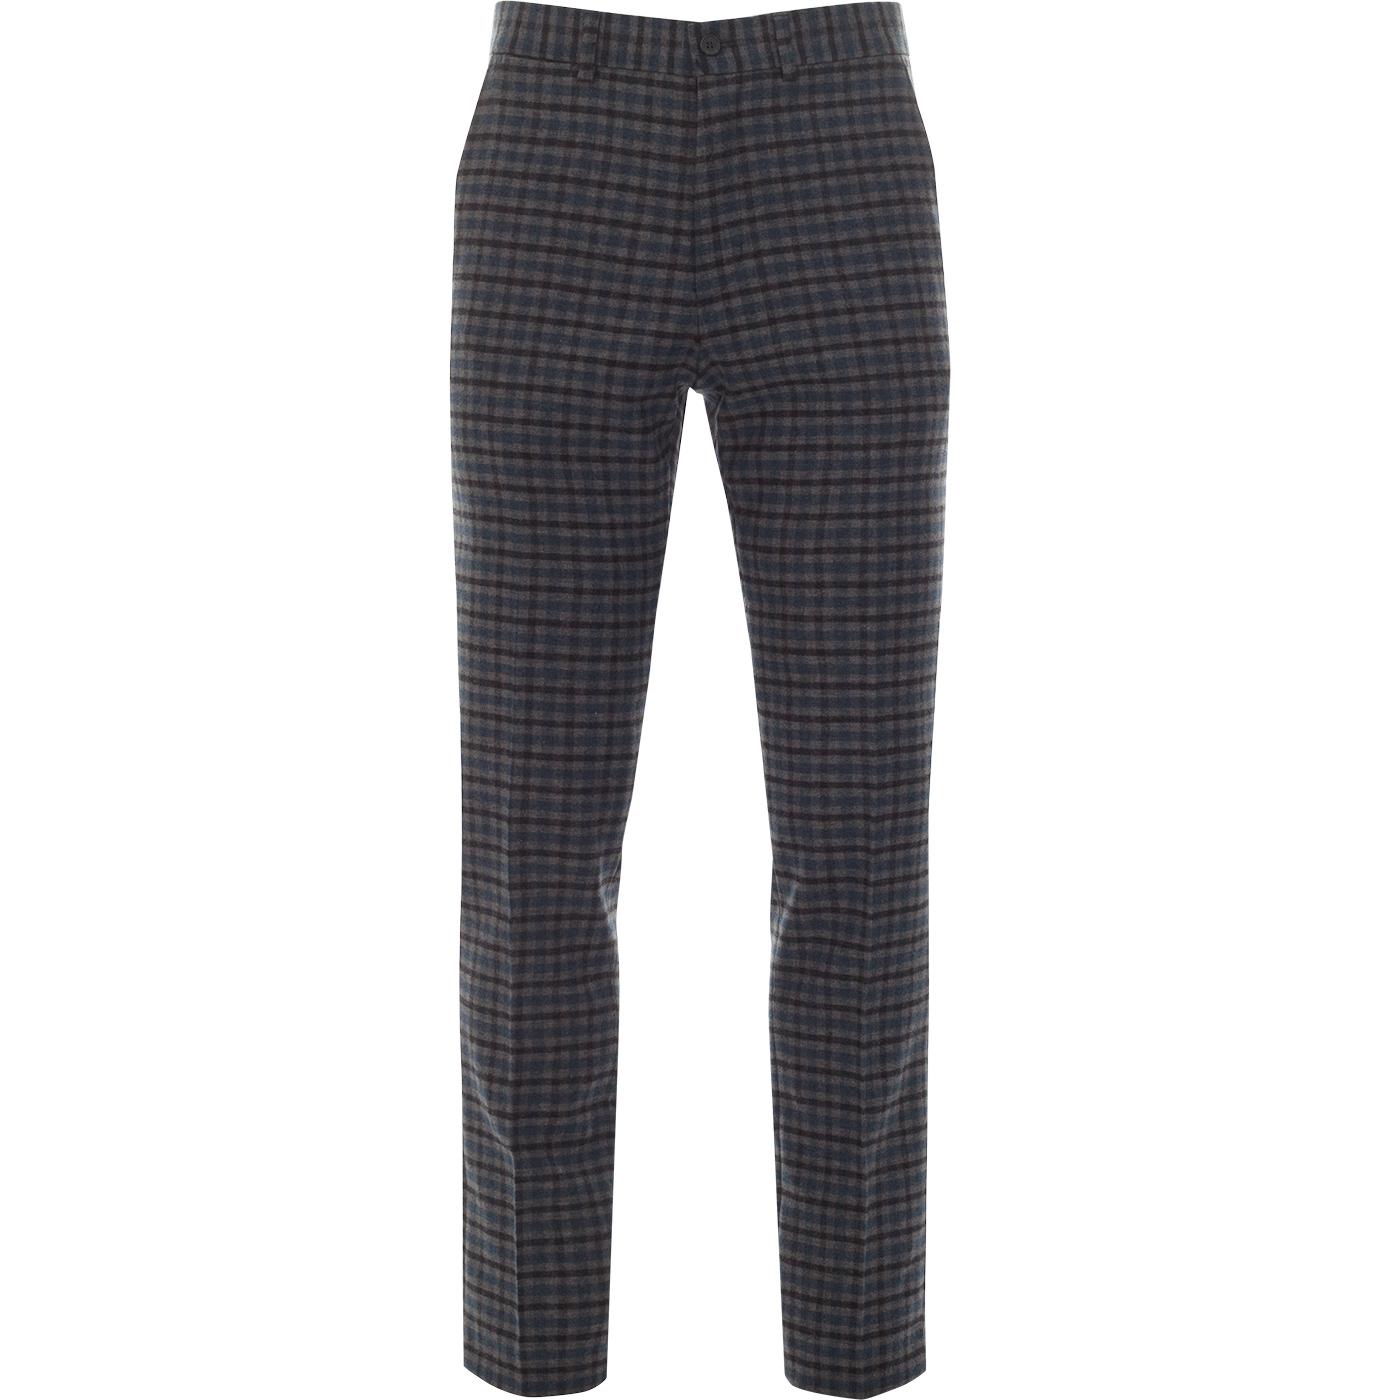 GIBSON LONDON 60s Mod Gingham Check Trousers GREY